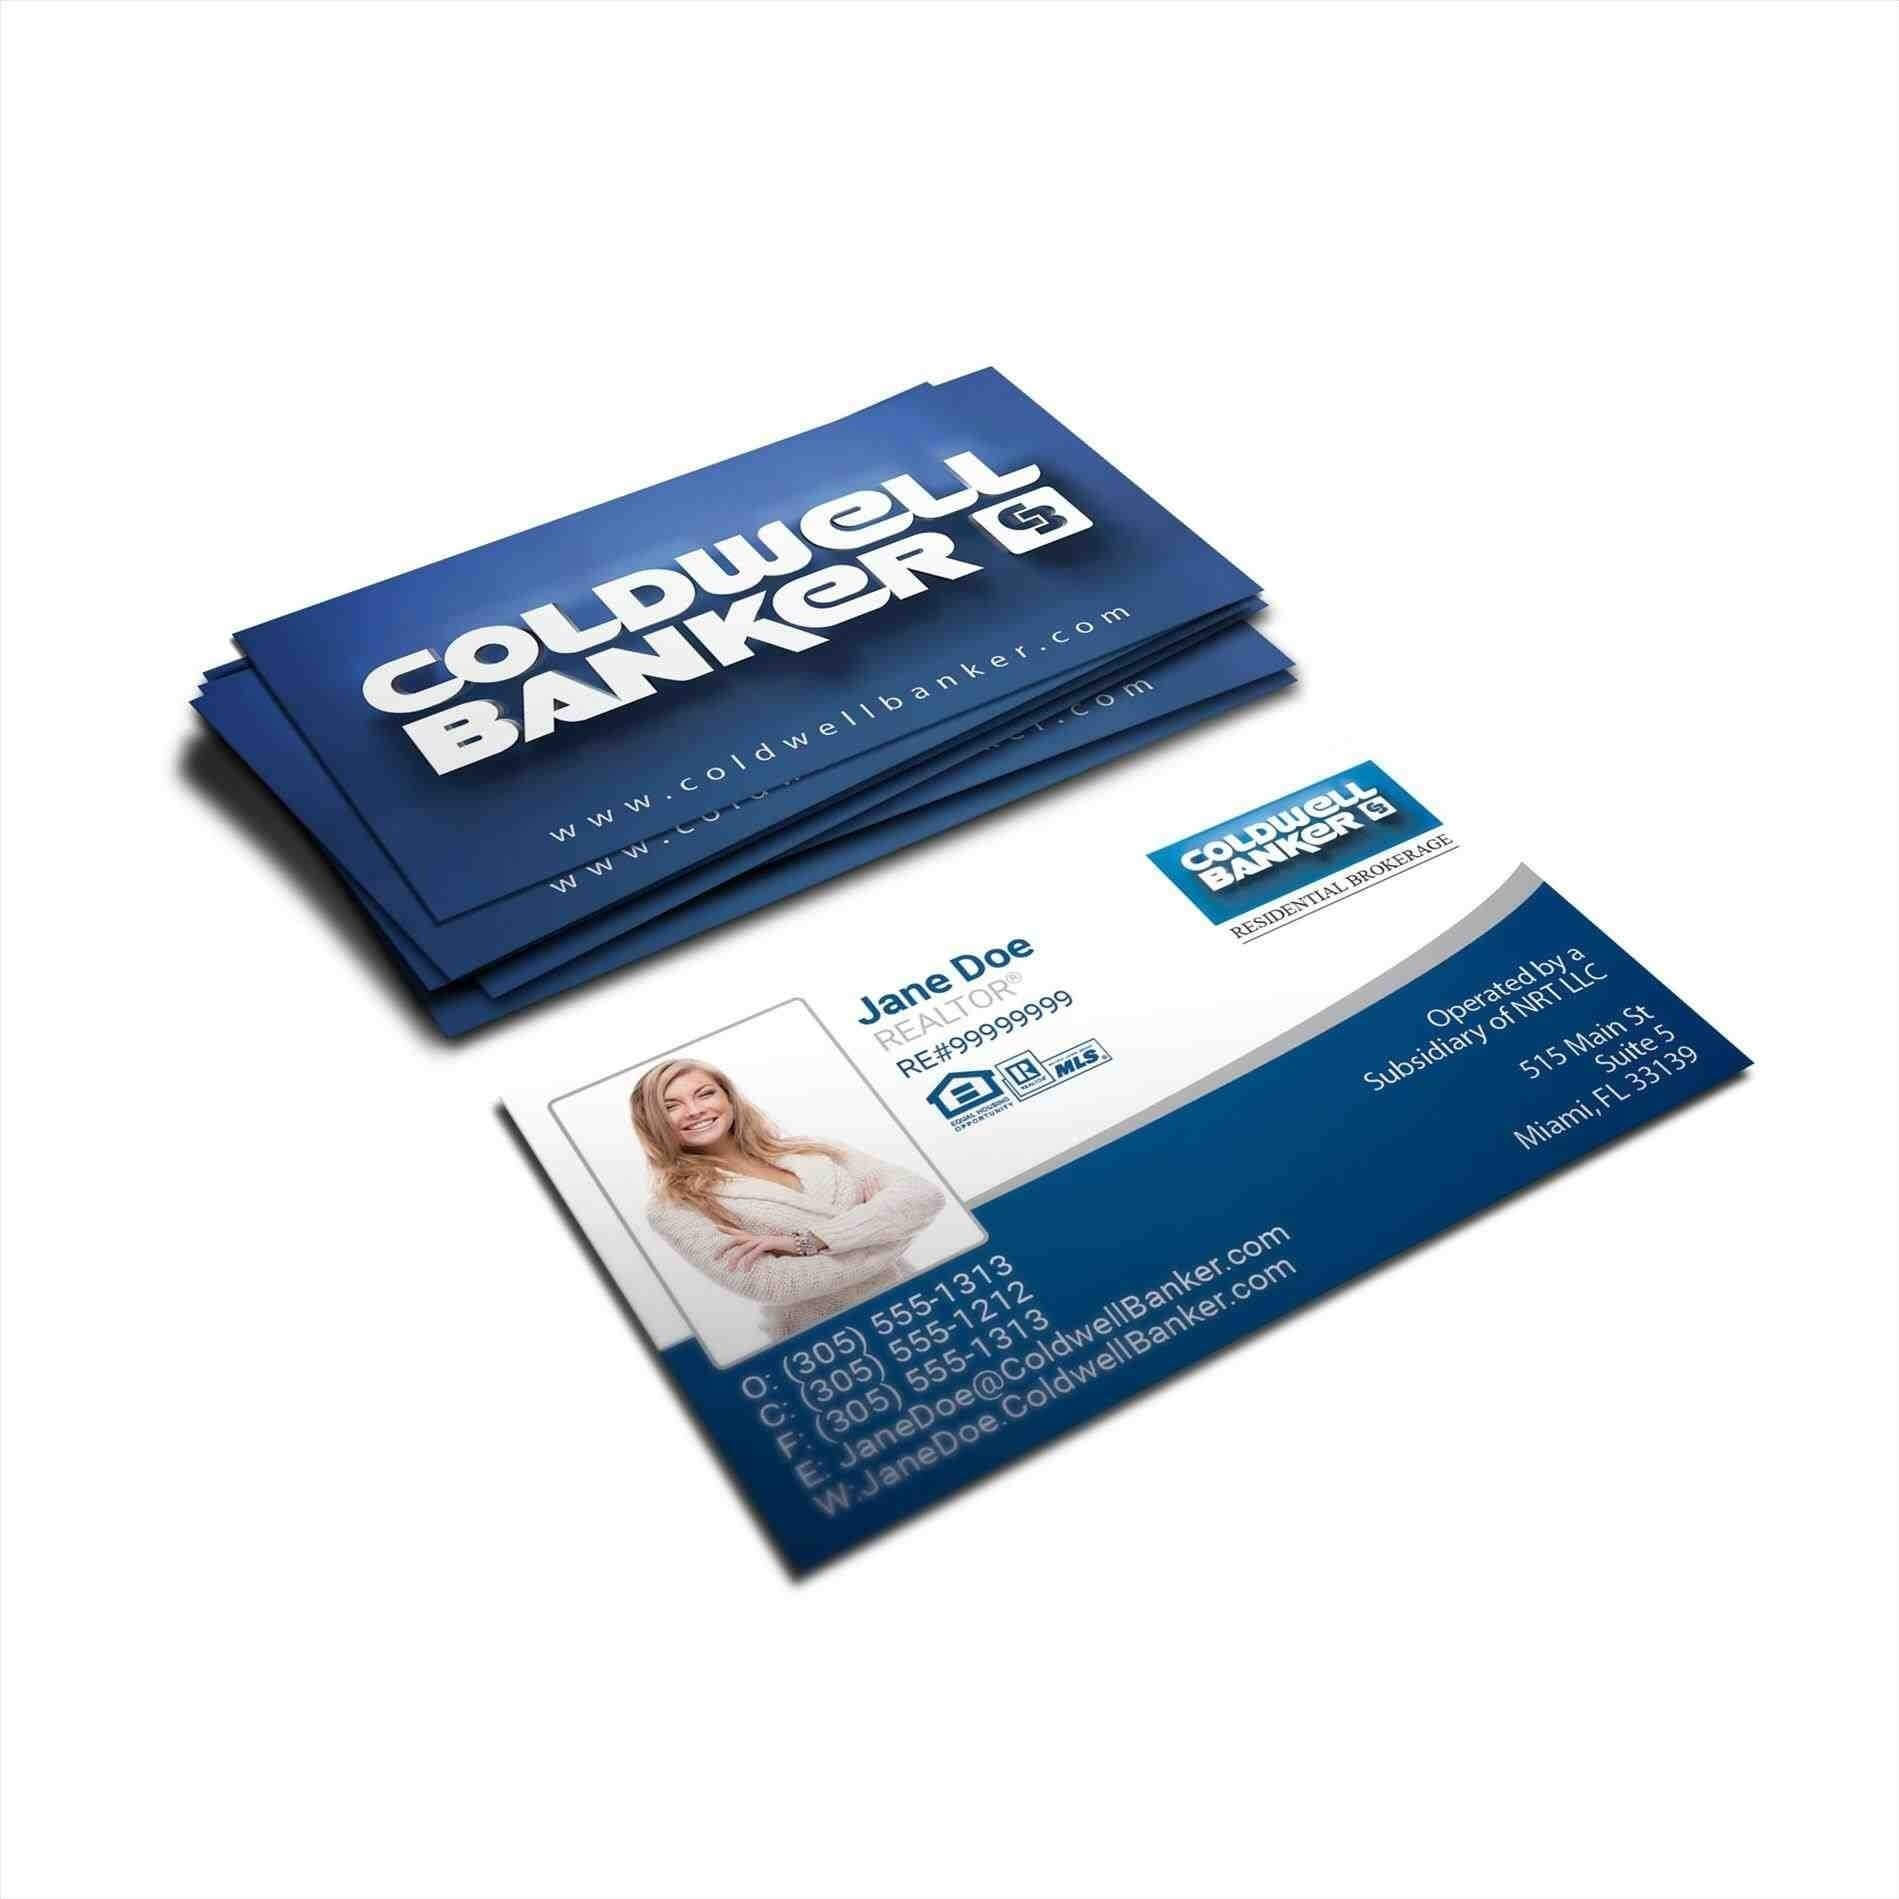 Merrill Corporation Coldwell Banker Business Cards Within Coldwell Banker Business Card Template